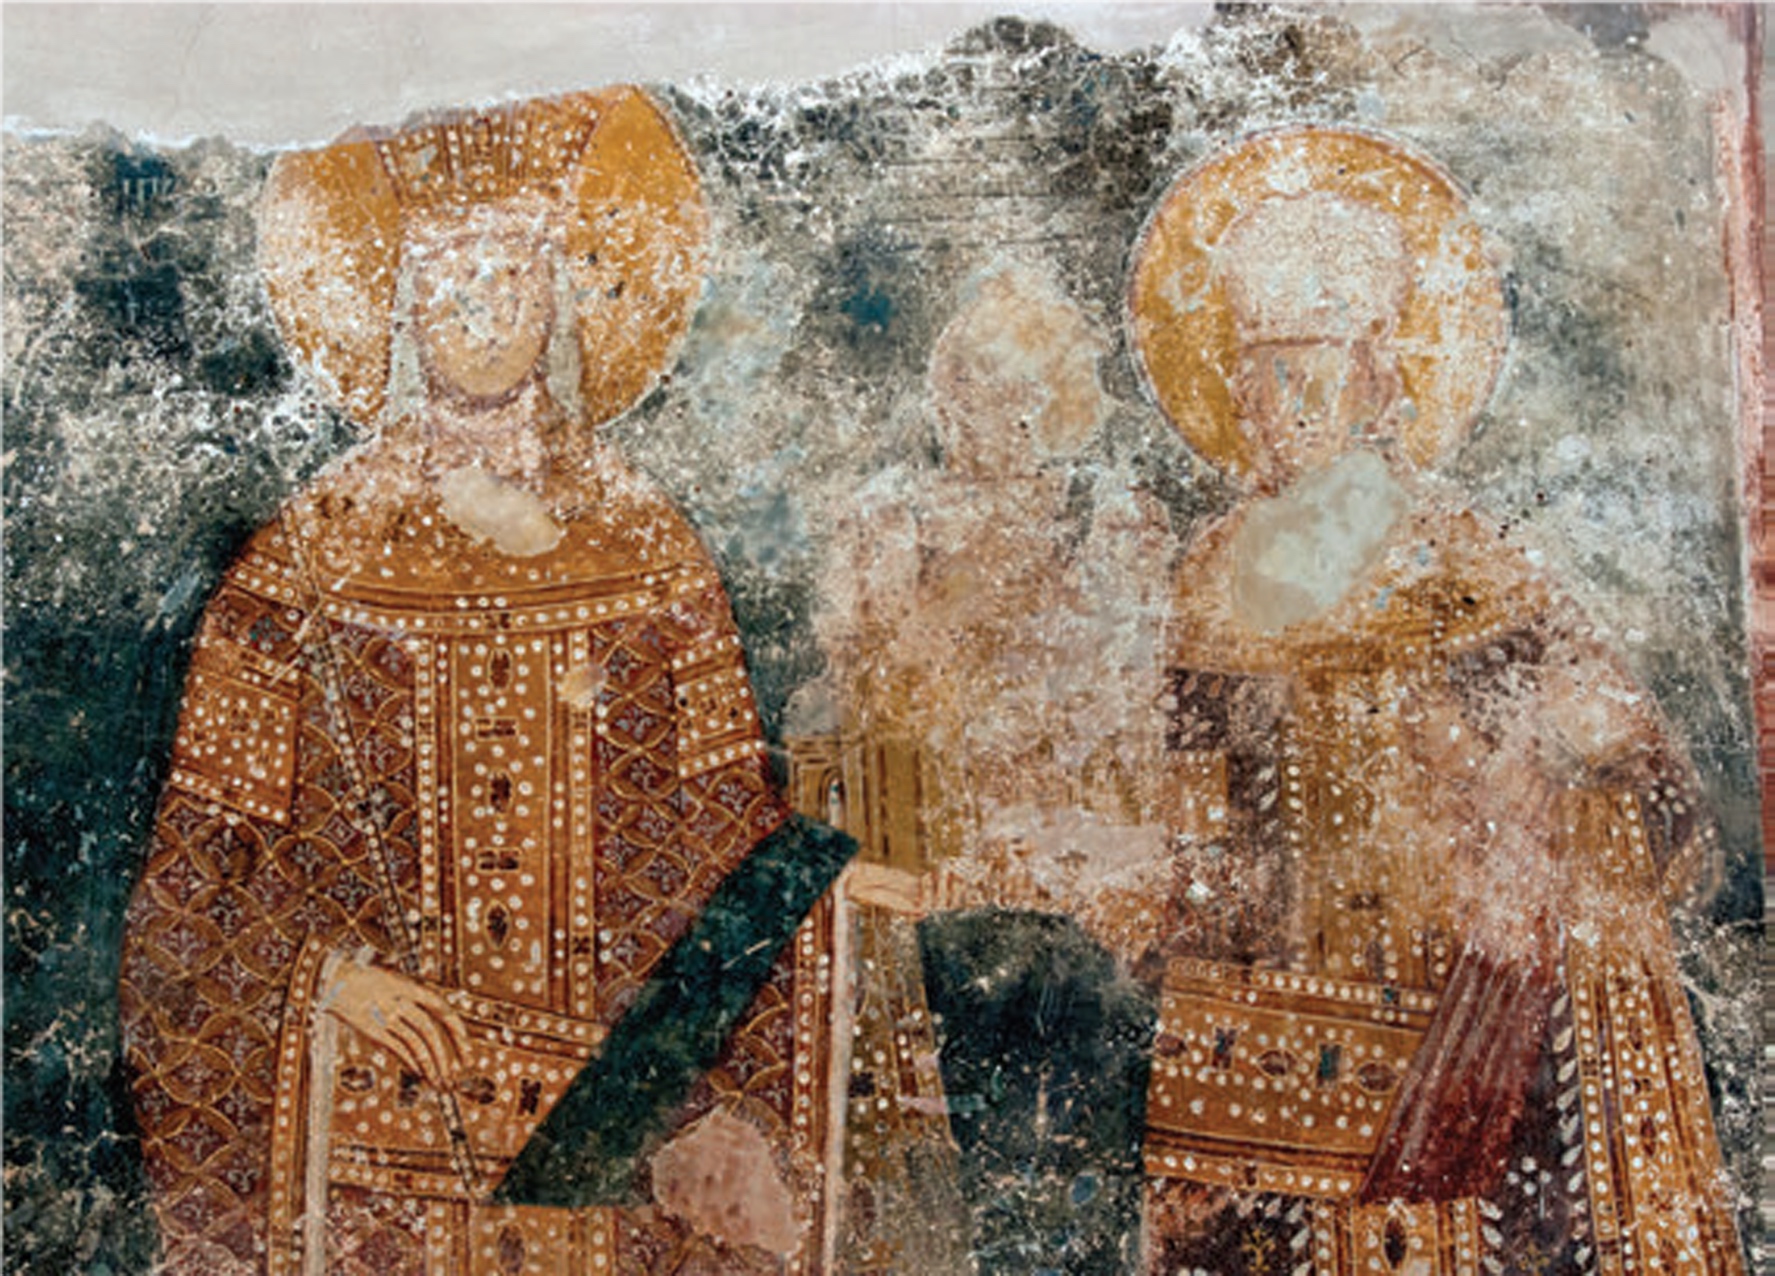 Ktetor portrait, south wall of the nave, Church of the Dormition of the Mother of God, Mateič monastery, 1348–52 (source: Dimitrova, The Church of the Holy Mother of God)